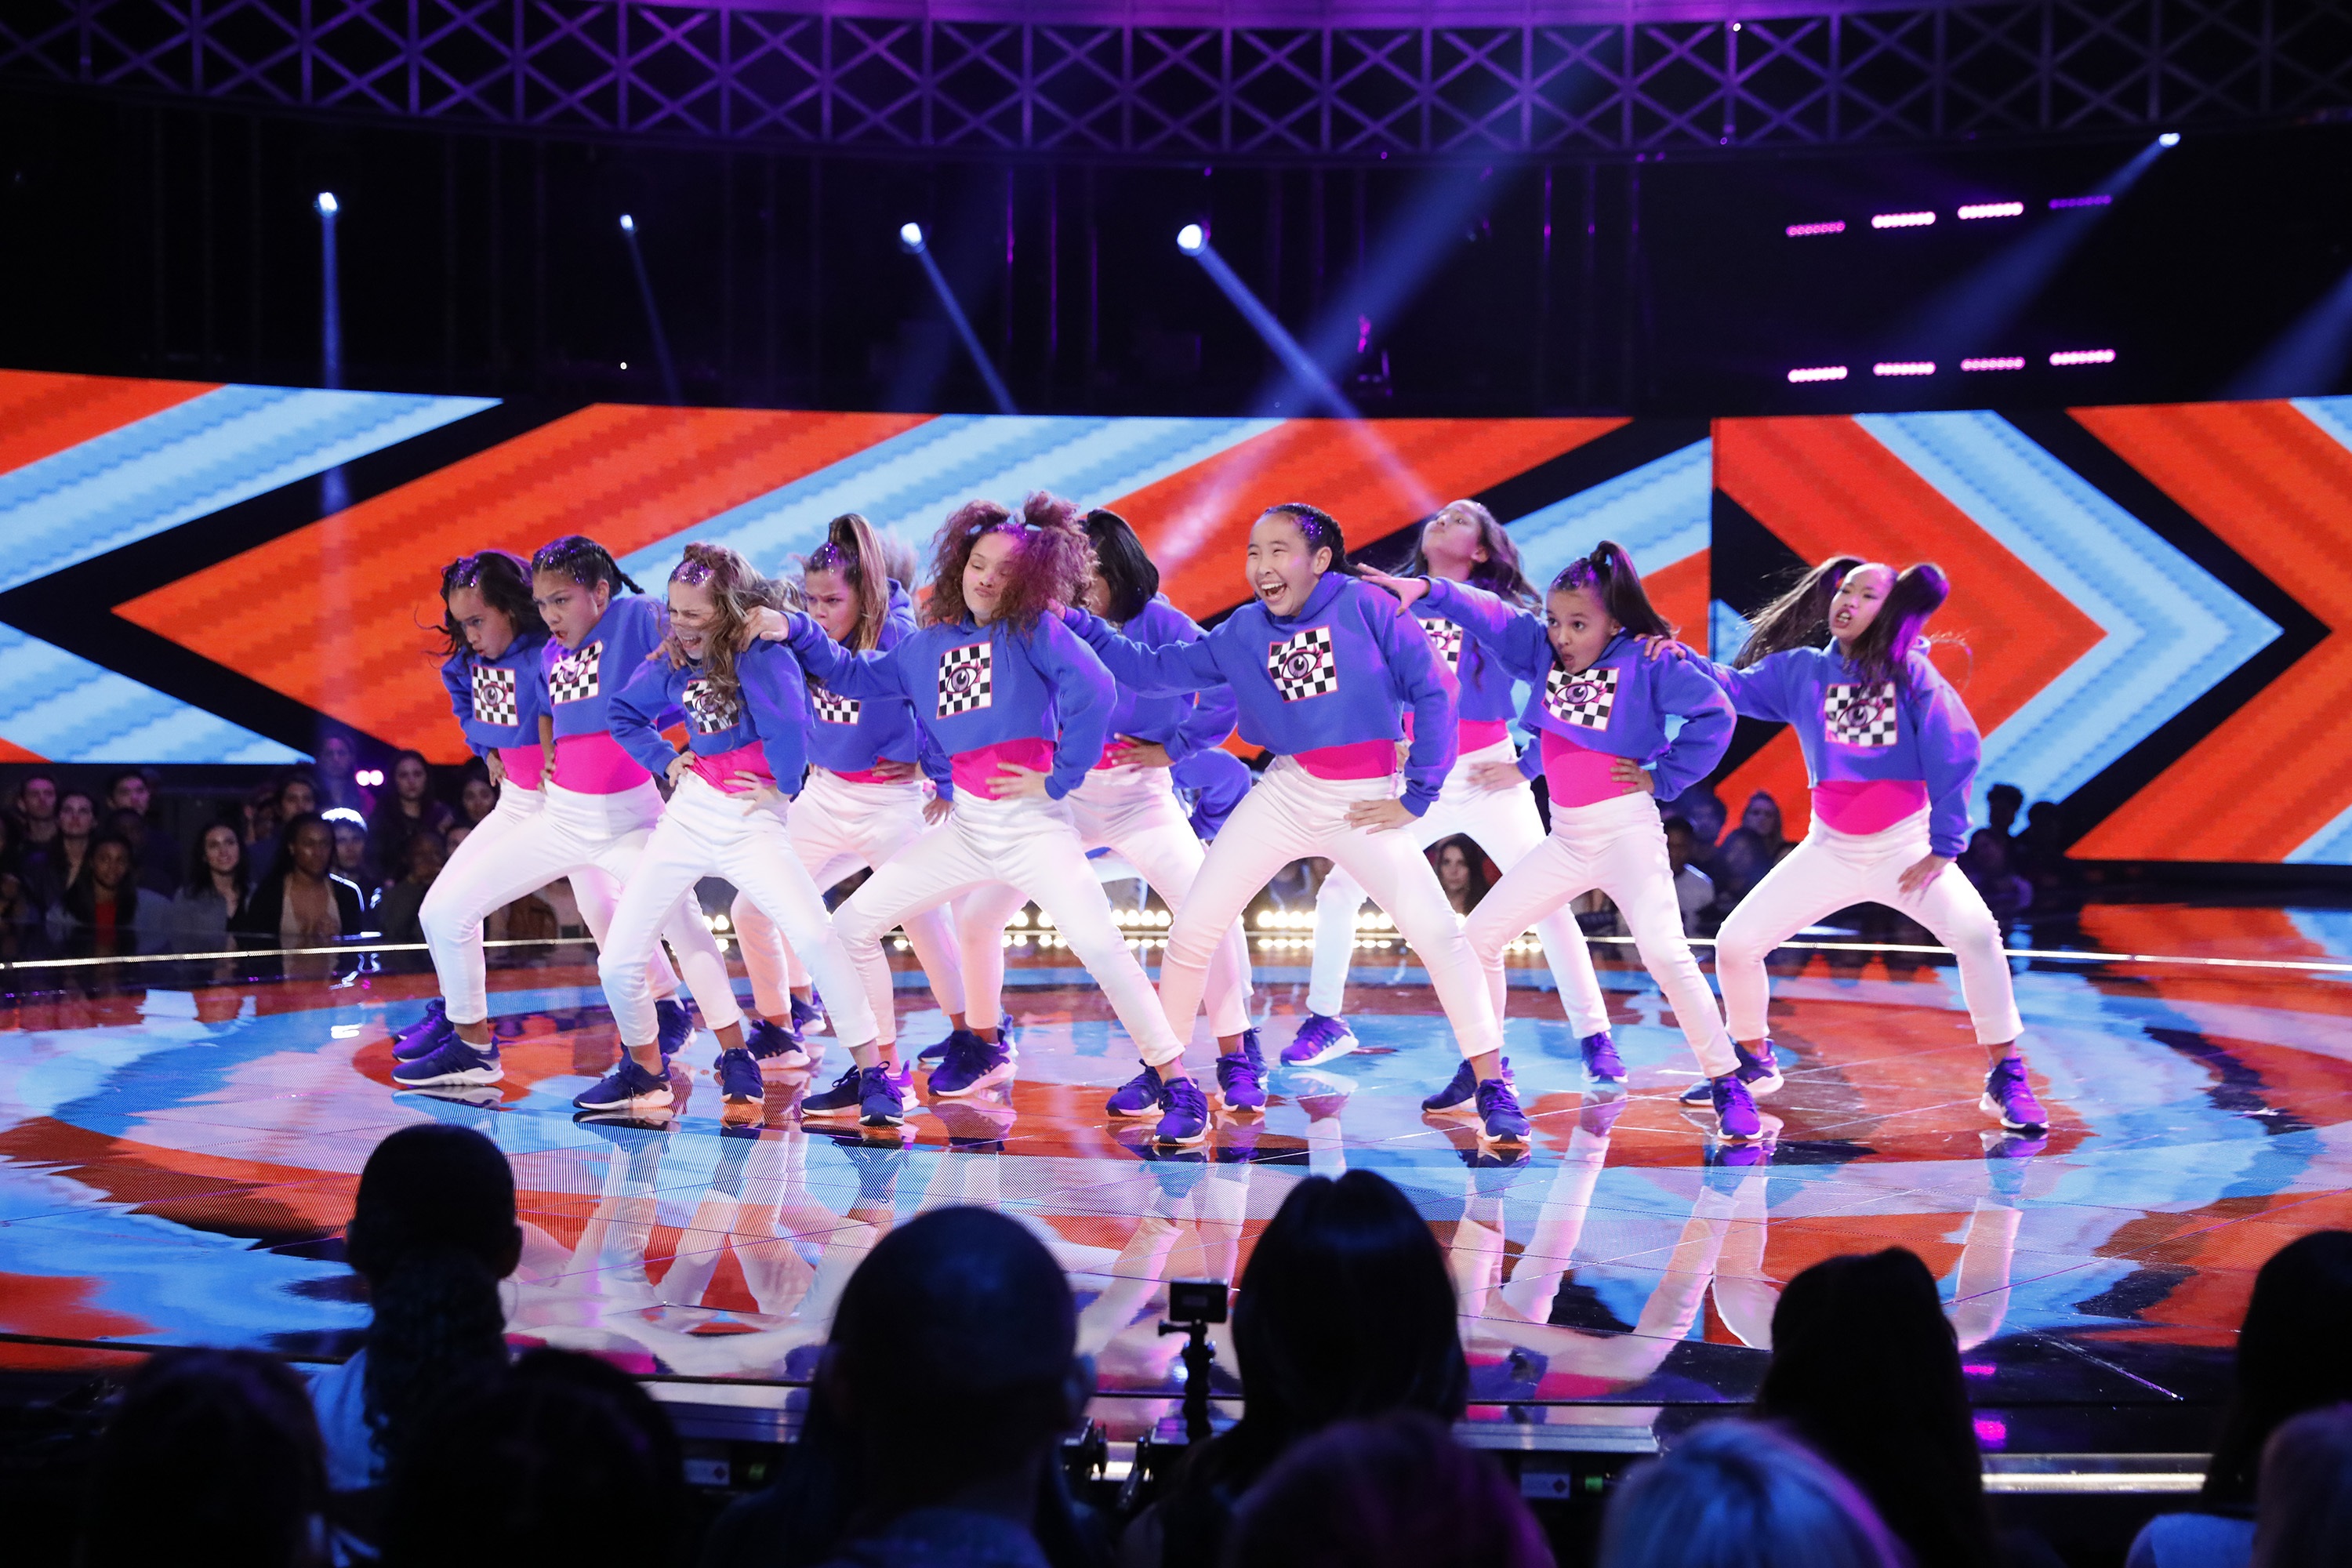 'World of Dance' Cubcakes performing on stage before their audition for 'AGT' Season 17